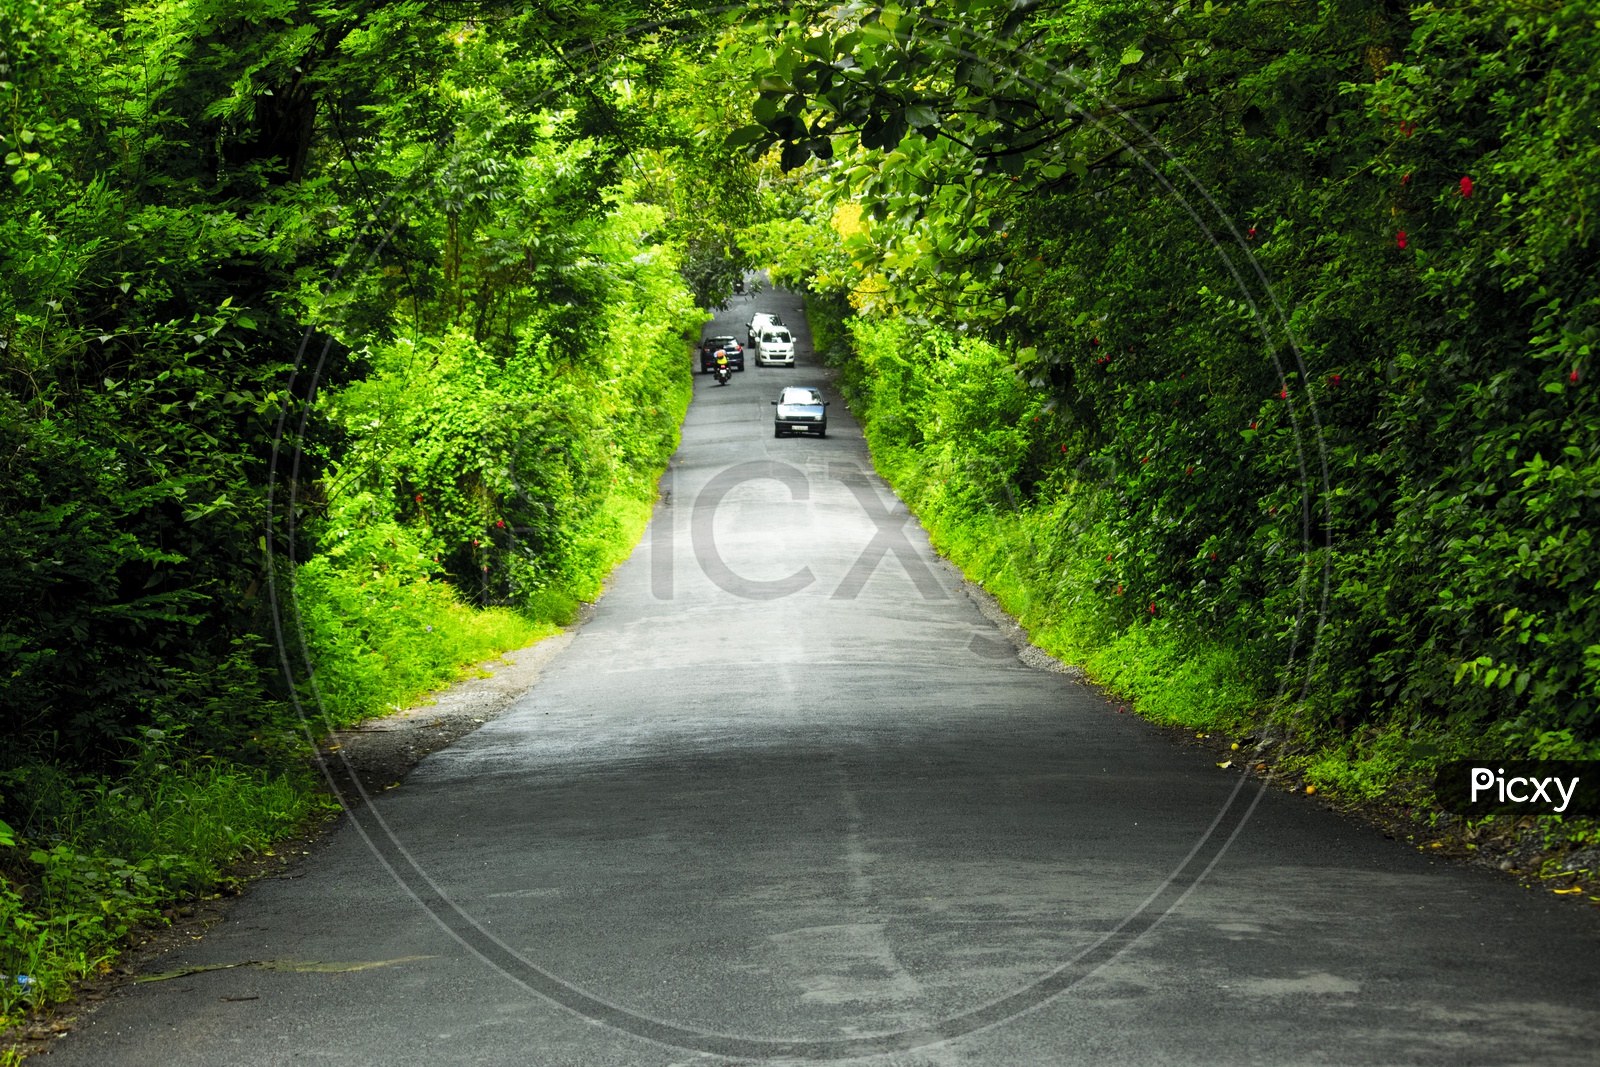 The Green Tunnel. This photo was taken in a road trip to wayanad, kerala